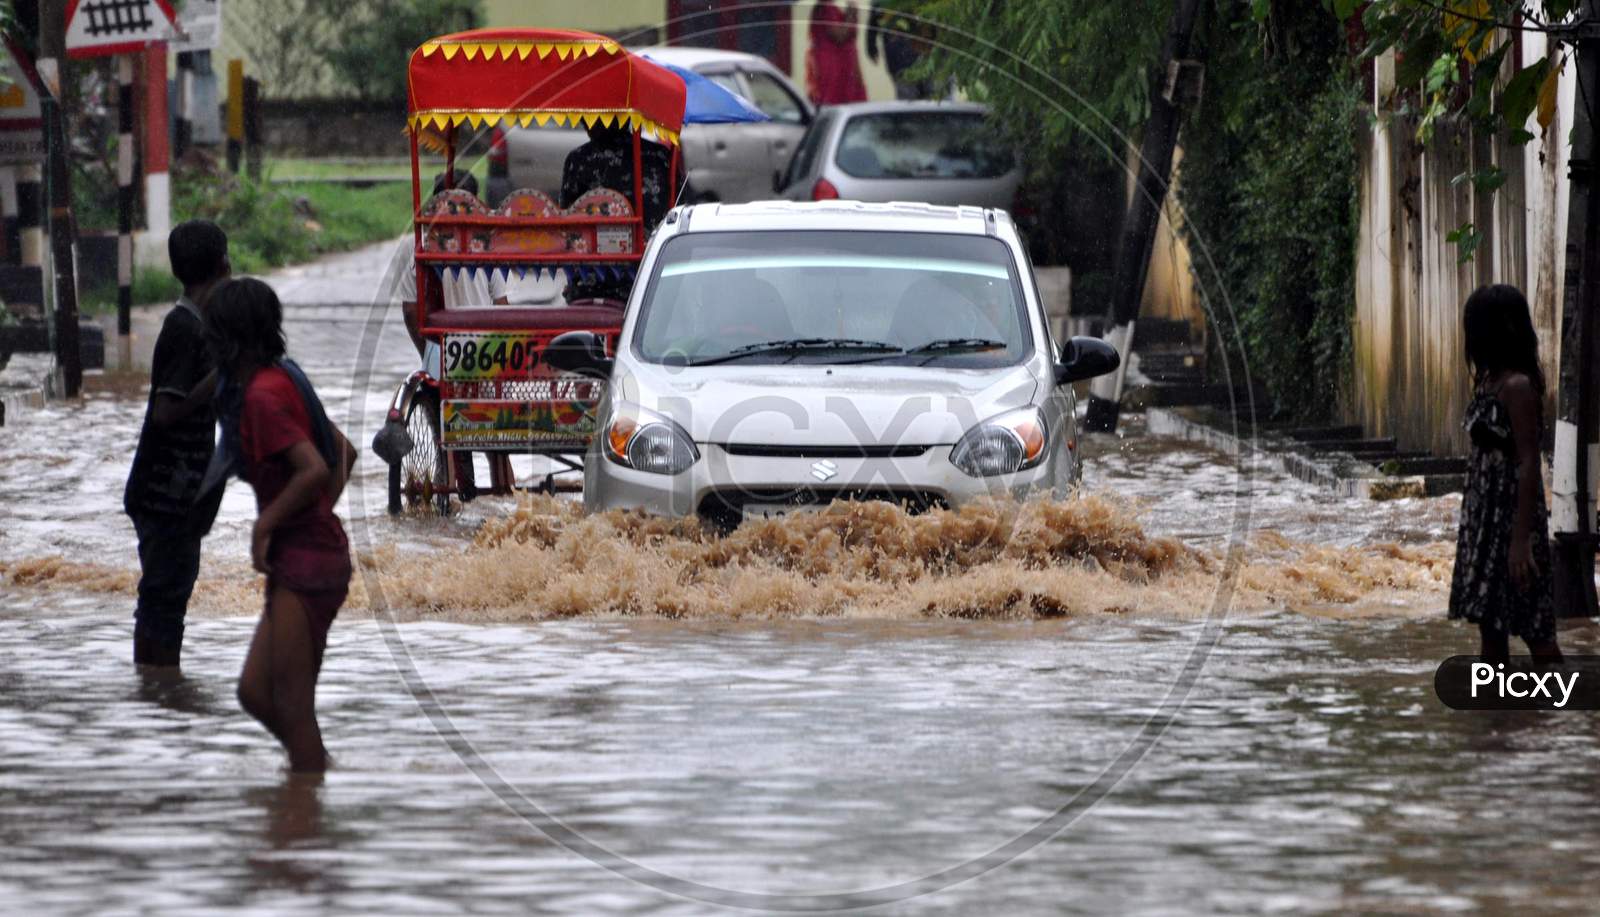 Commuters wade through a water logged street following heavy rains, in Guwahati, India on September 14, 2020